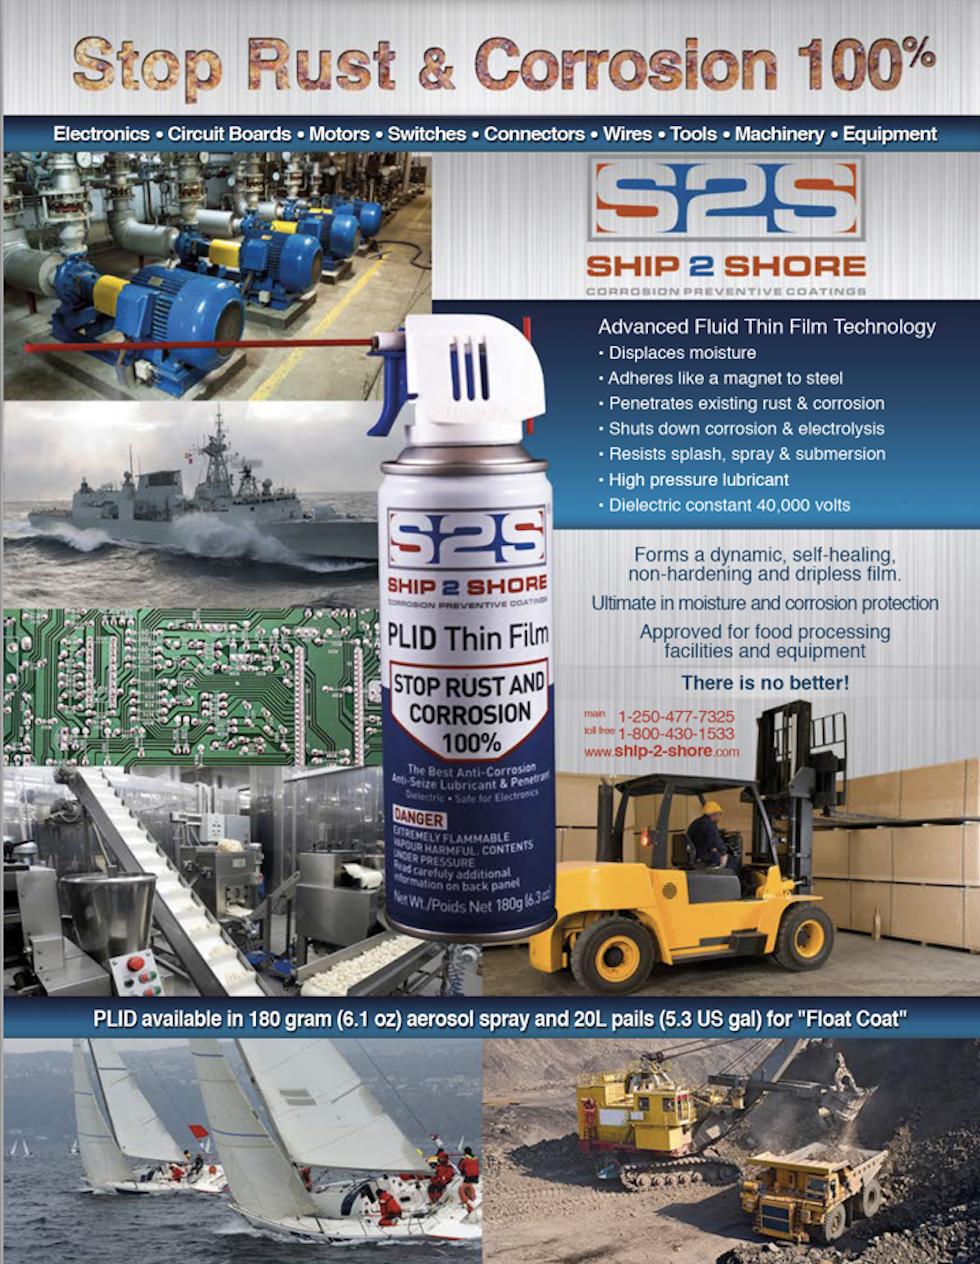 Ship-2-Shore PLID Thin Film protect against rust and corrosion for maritime, military & security, agricultural, farming equipment, food processing, public utilities, plant & equipment, transport, recreational, sailing boats, motor vehicles